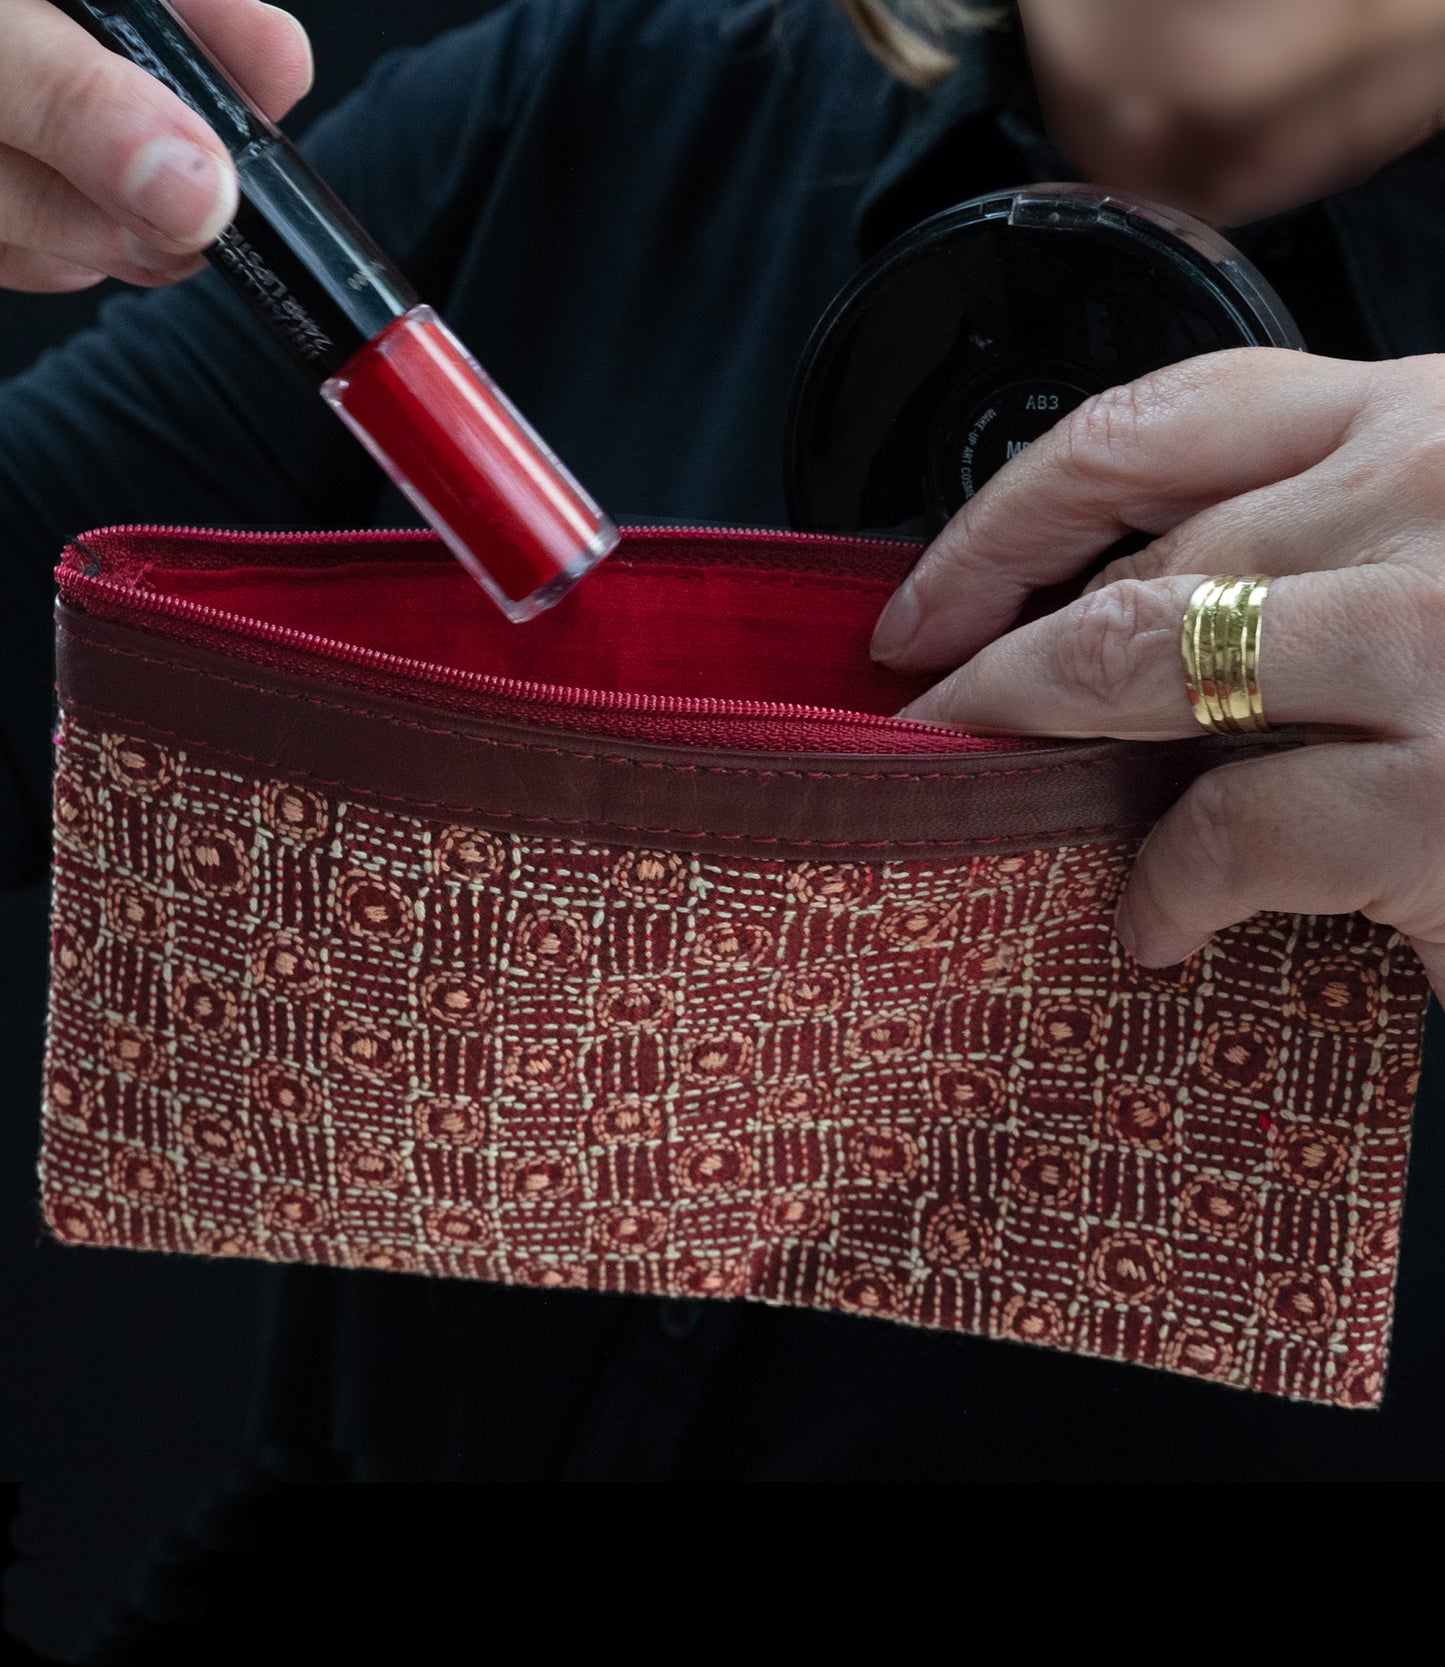 Embroidered silk pouch red